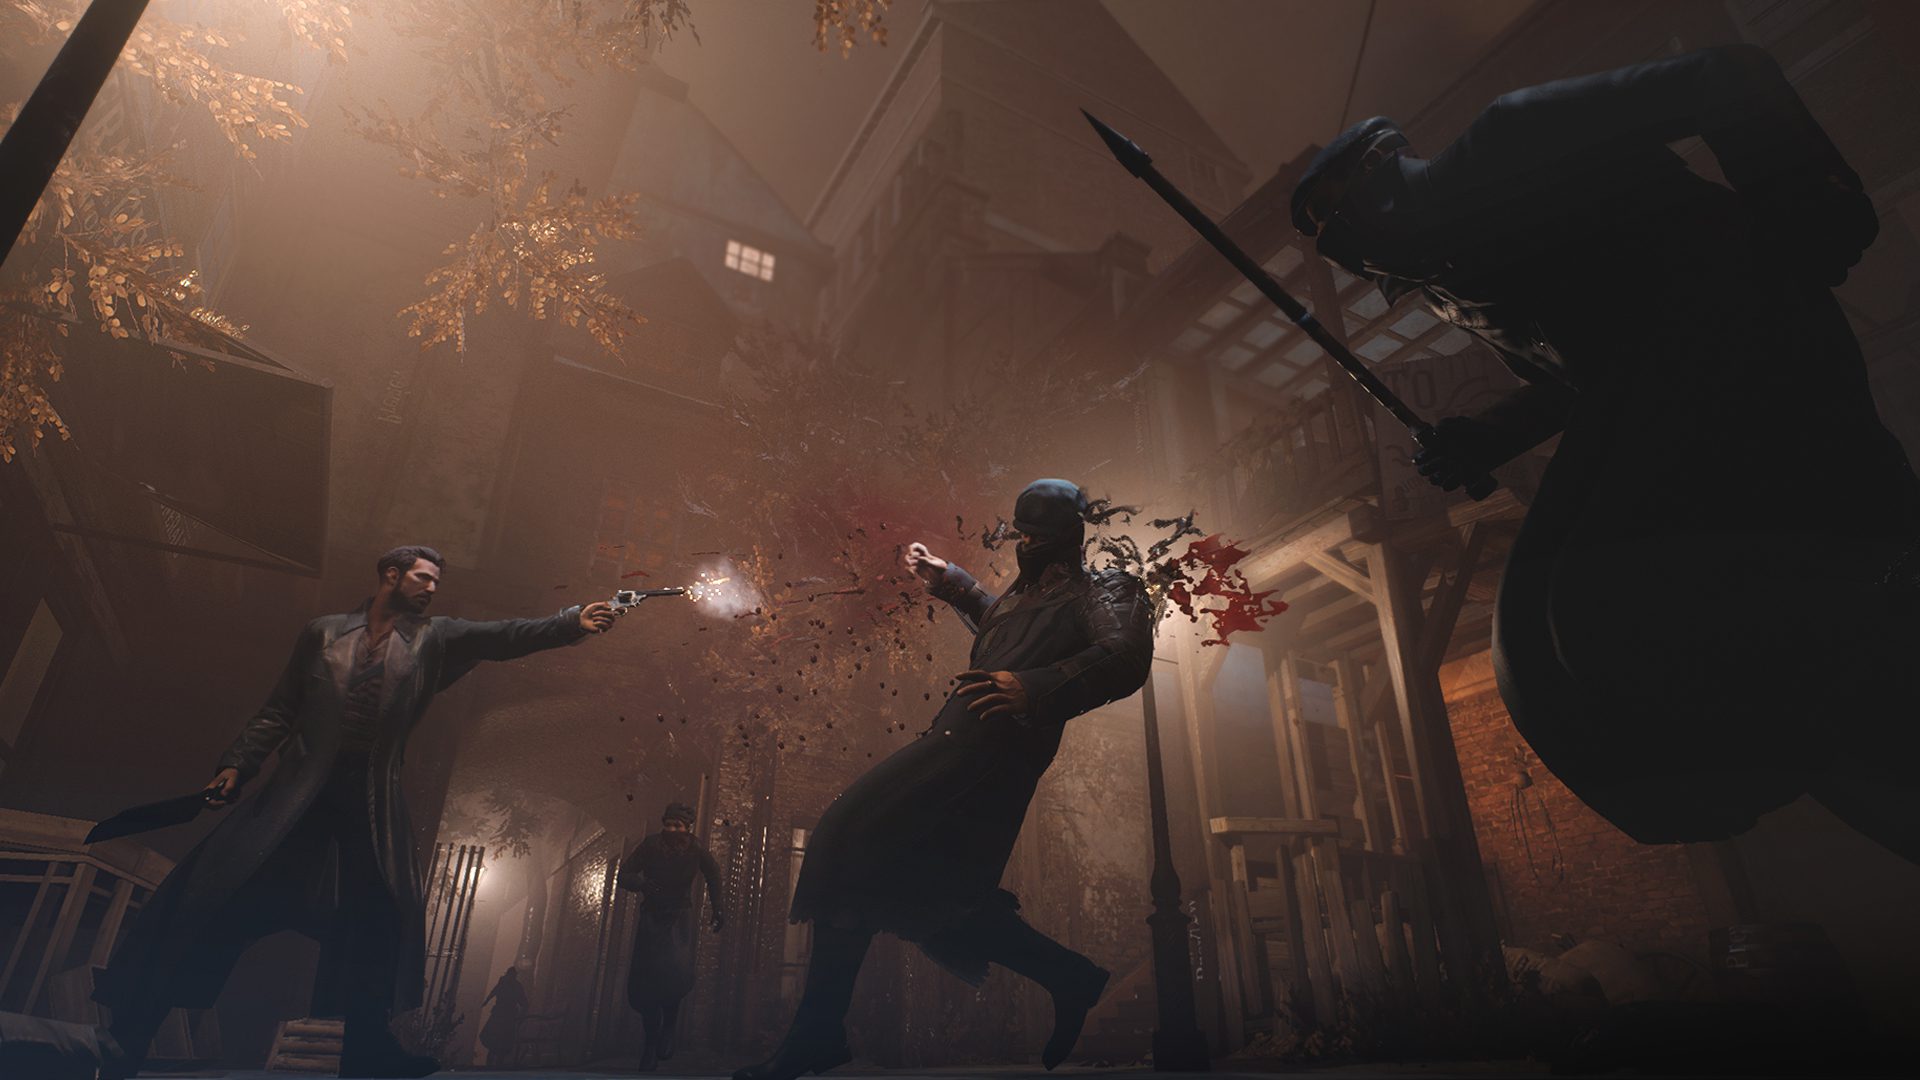 Watch 55 minutes of uncut gameplay from the upcoming Vampyr